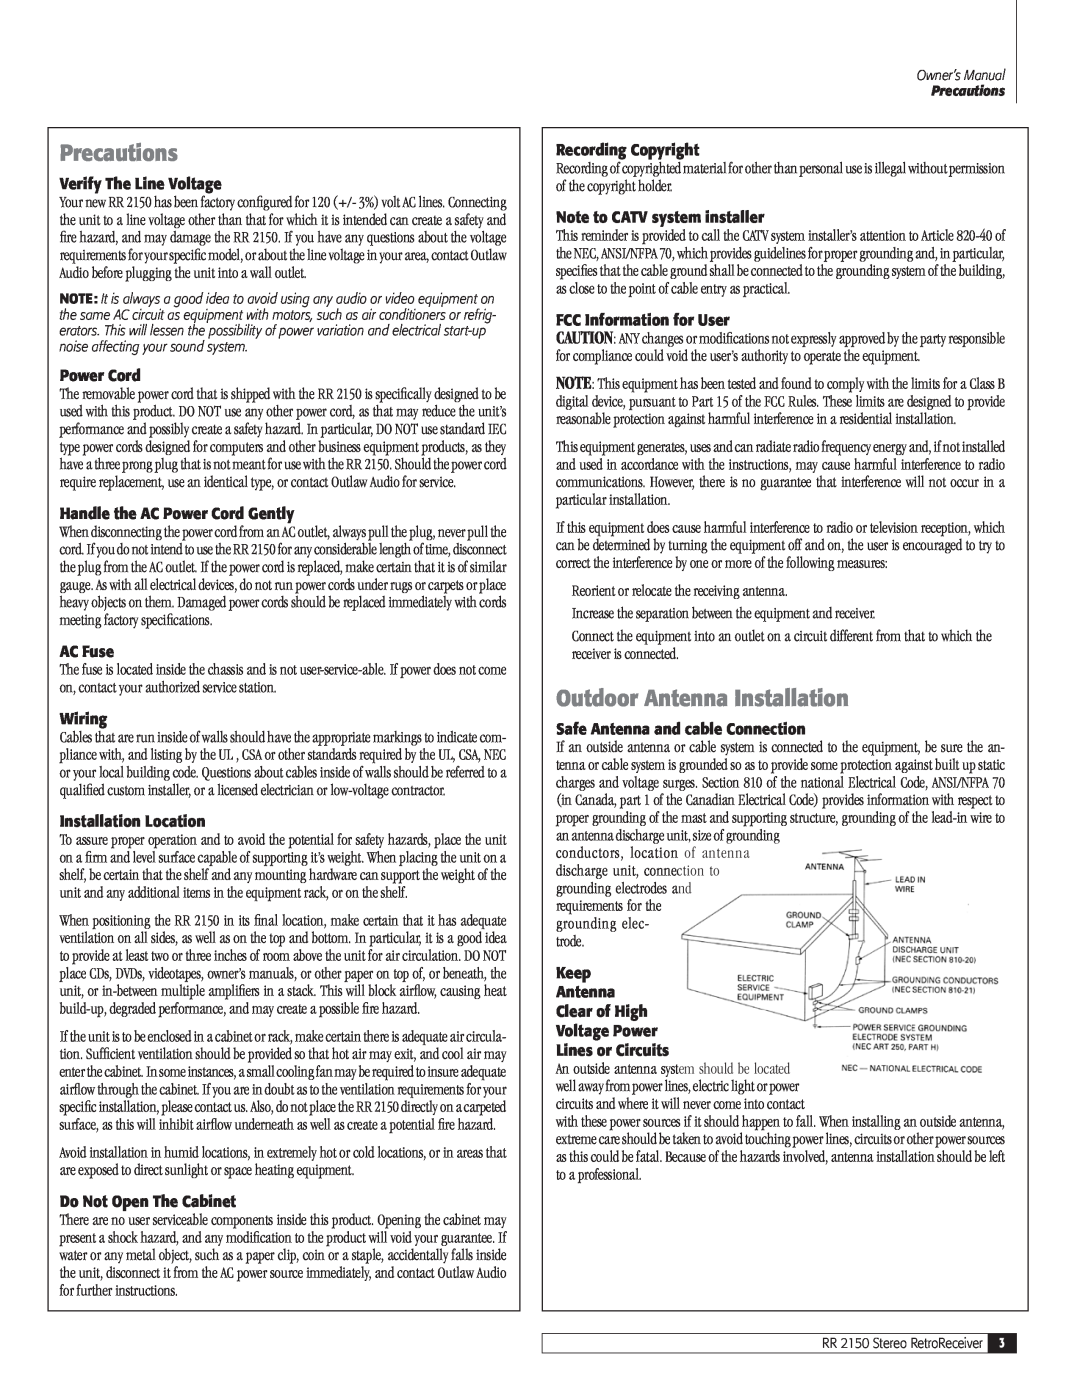 Outlaw Audio RR 2150 owner manual Precautions, Outdoor Antenna Installation 